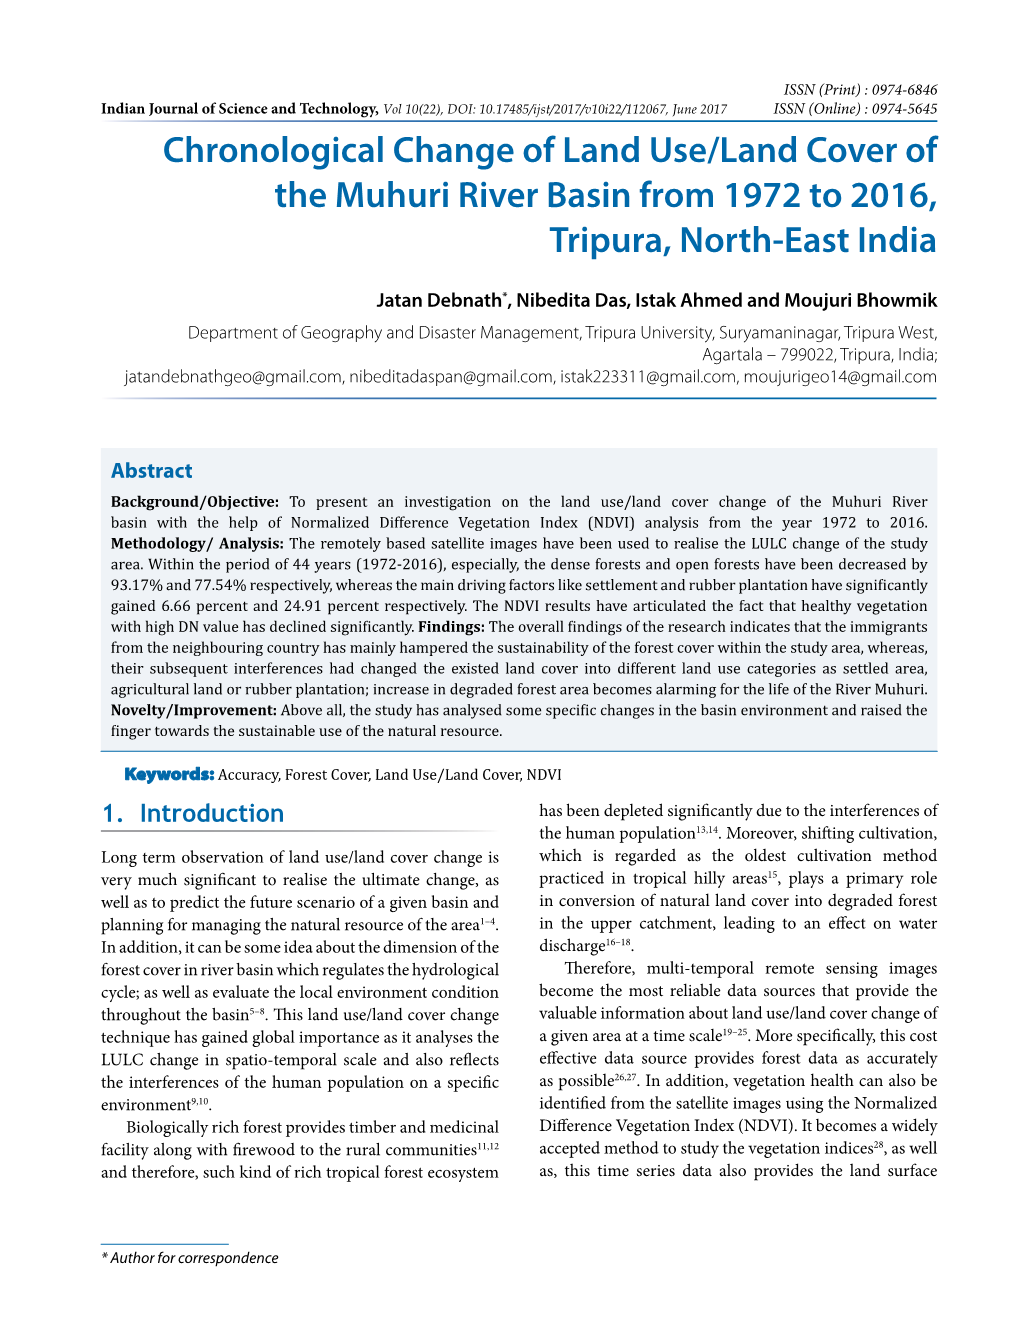 Chronological Change of Land Use/Land Cover of the Muhuri River Basin from 1972 to 2016, Tripura, North-East India